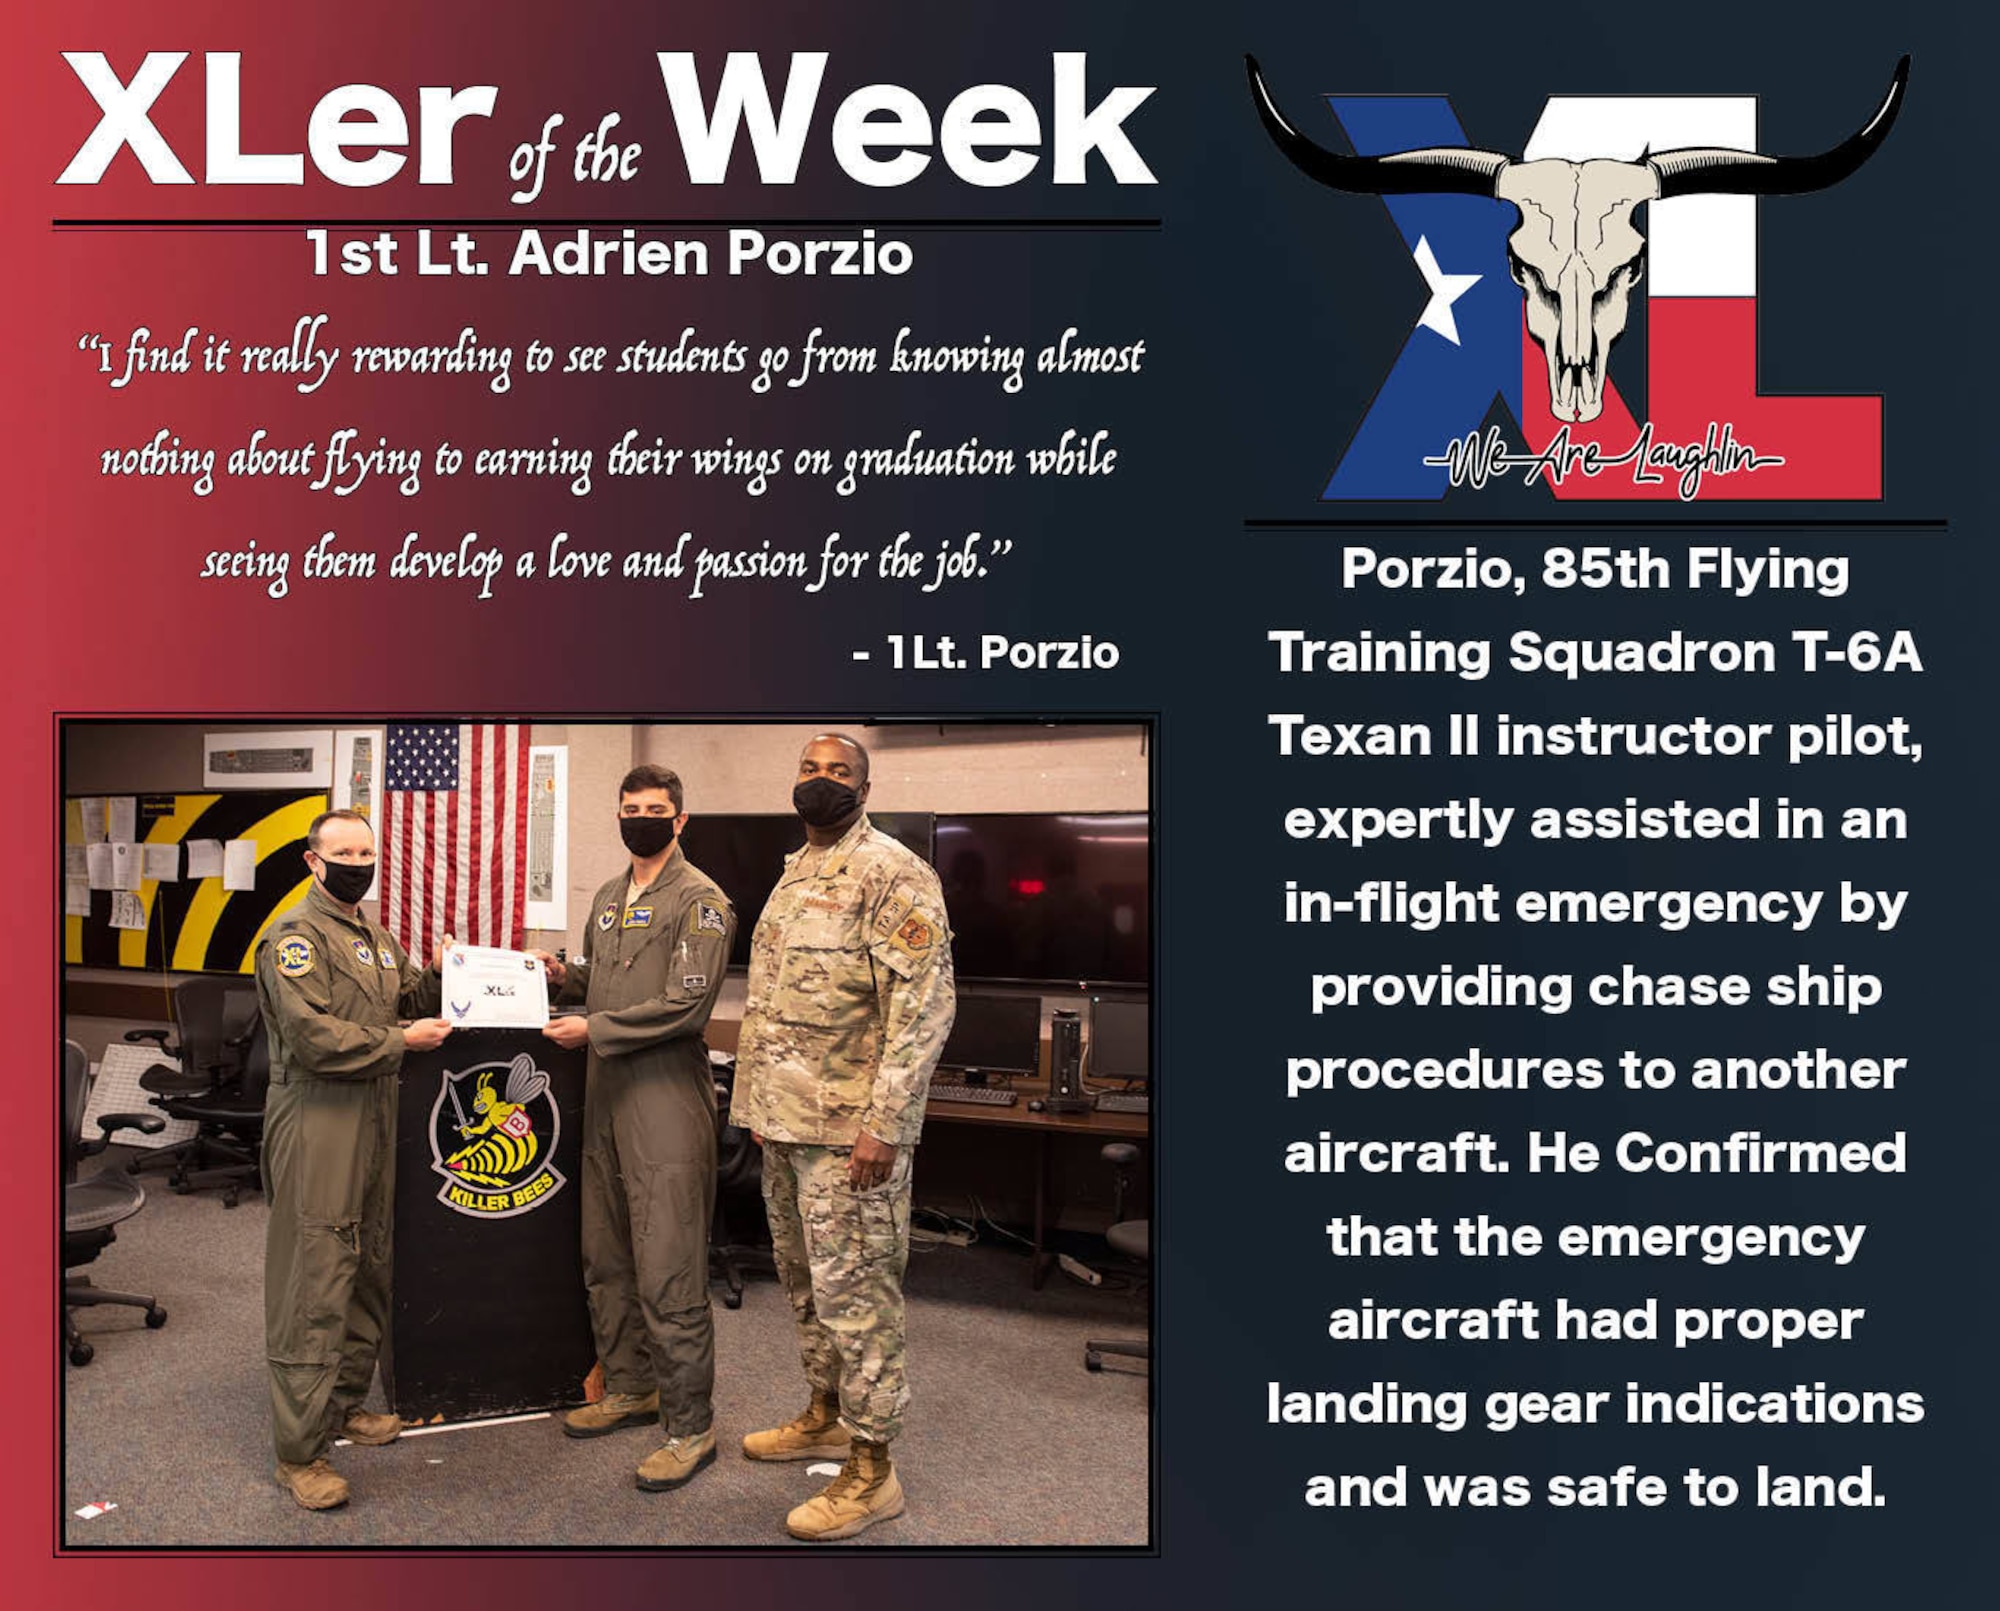 1st Lt. Adrien Porzio, 85th Flying Traning Squadron T-6A Texan II instructor pilot, was chosen by wing leadership to be the “XLer of the Week”, the week of Nov. 18, 2020, at Laughlin Air Force Base, Texas. The “XLer” award, presented by Col. Craig Prather, 47th Flying Training Wing commander, and Chief Master Sgt. Robert L. Zackery III, 47th FTW command chief master sergeant, is given to those who consistently make outstanding contributions to their unit and the Laughlin mission. (U.S. Air Force Graphic by Airman 1st Class David Phaff)